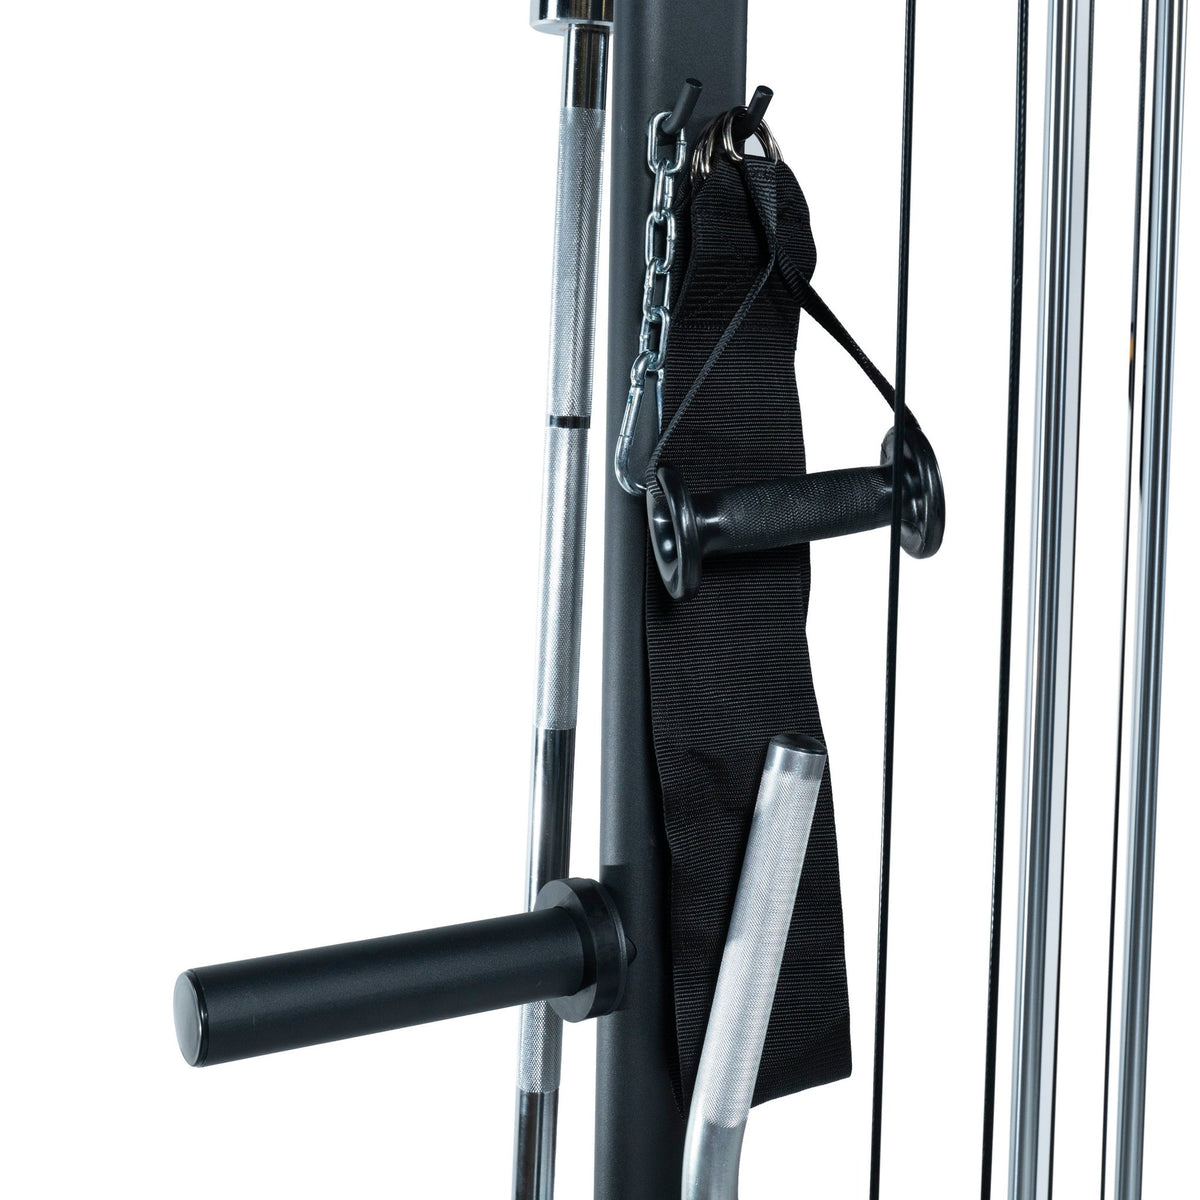 FitWay Equip. Forza FTS Functional System - Fitness Experience